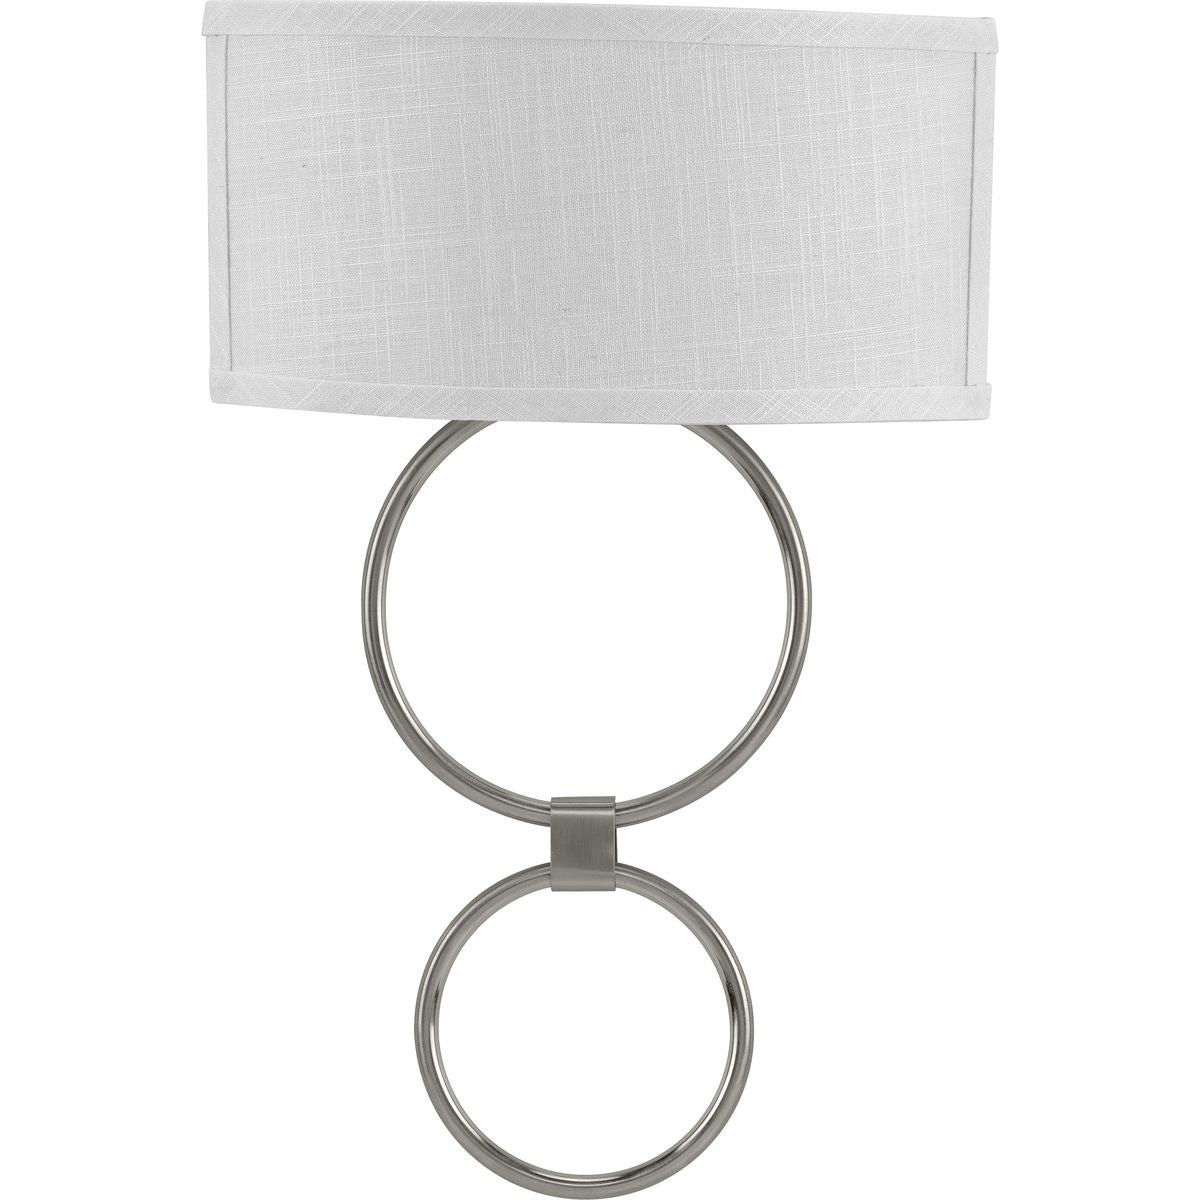 PROGRESS LIGHTING P710058-009-30 Brushed Nickel LED Shaded Sconce Collection Brushed Nickel One-Light Circle LED Wall Sconce